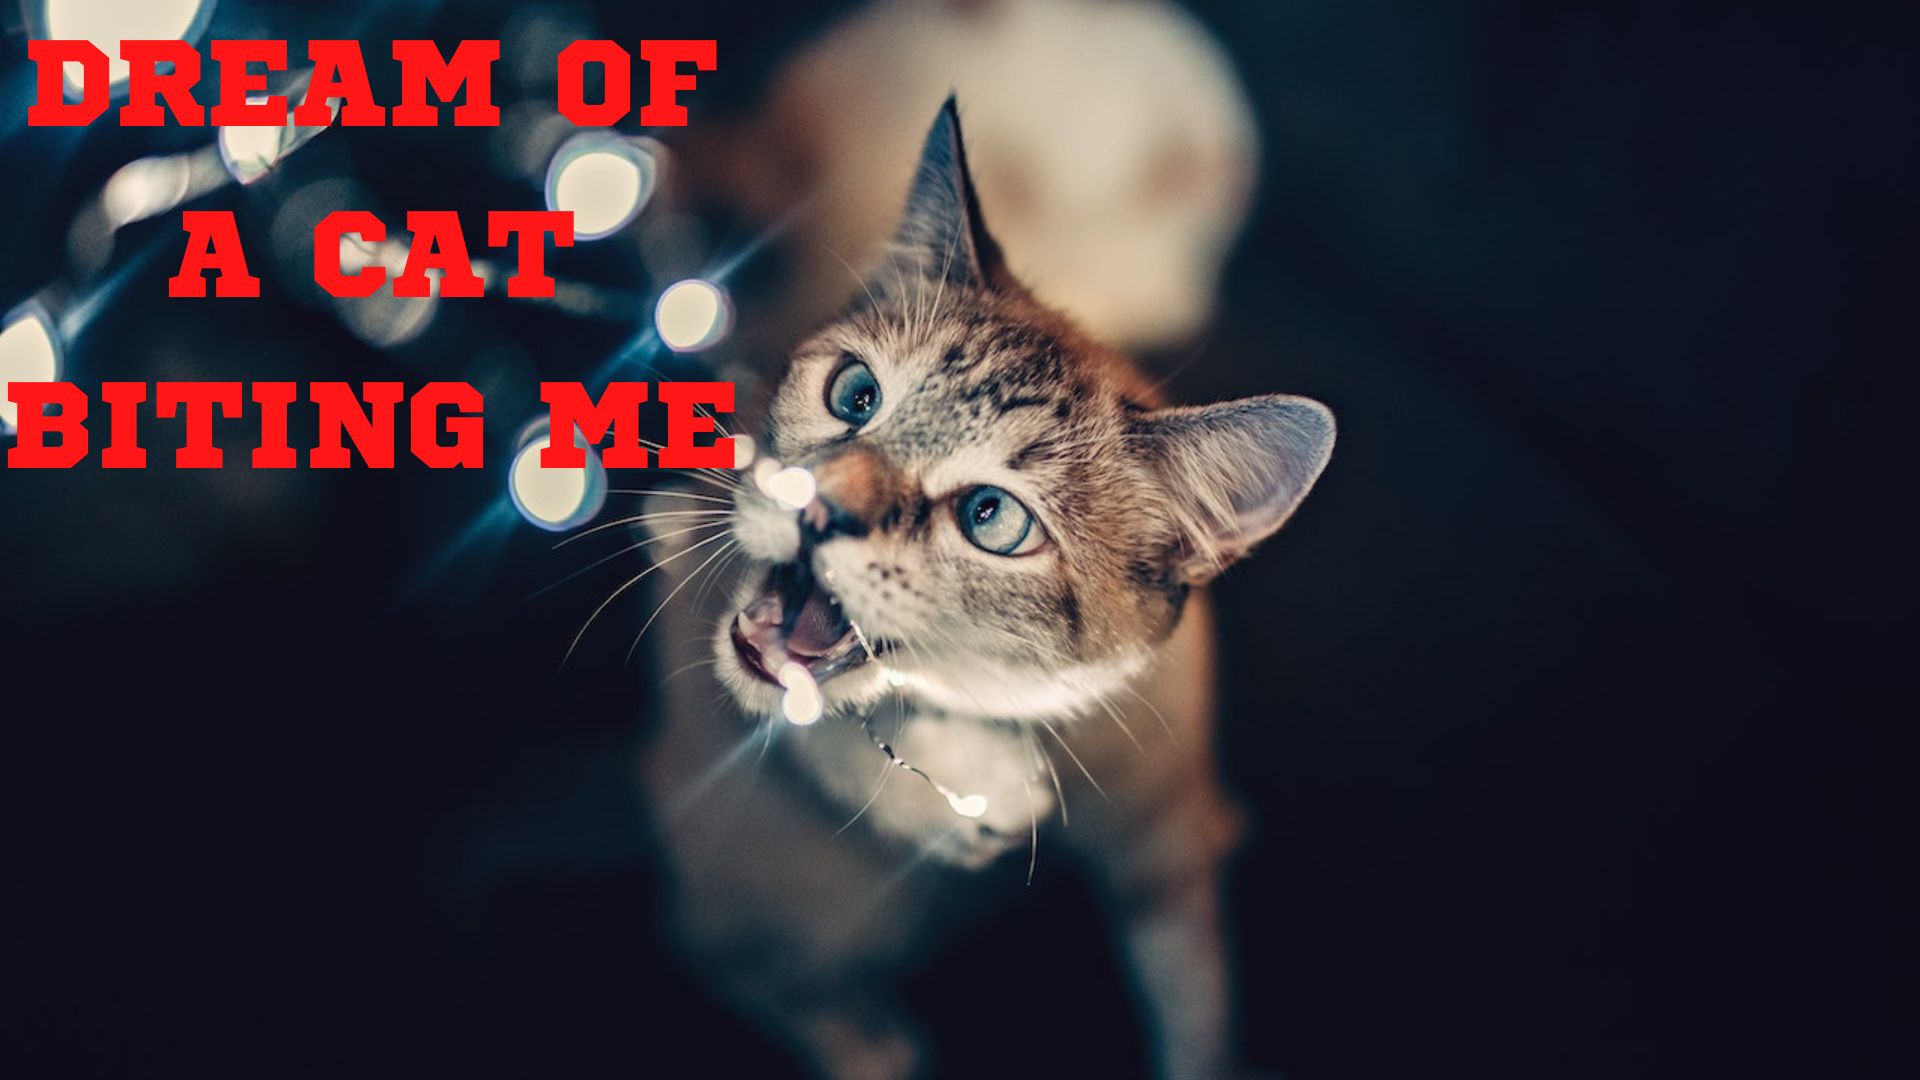 Dream Of A Cat Biting Me - A Sign For Anger And Emotional Unrest